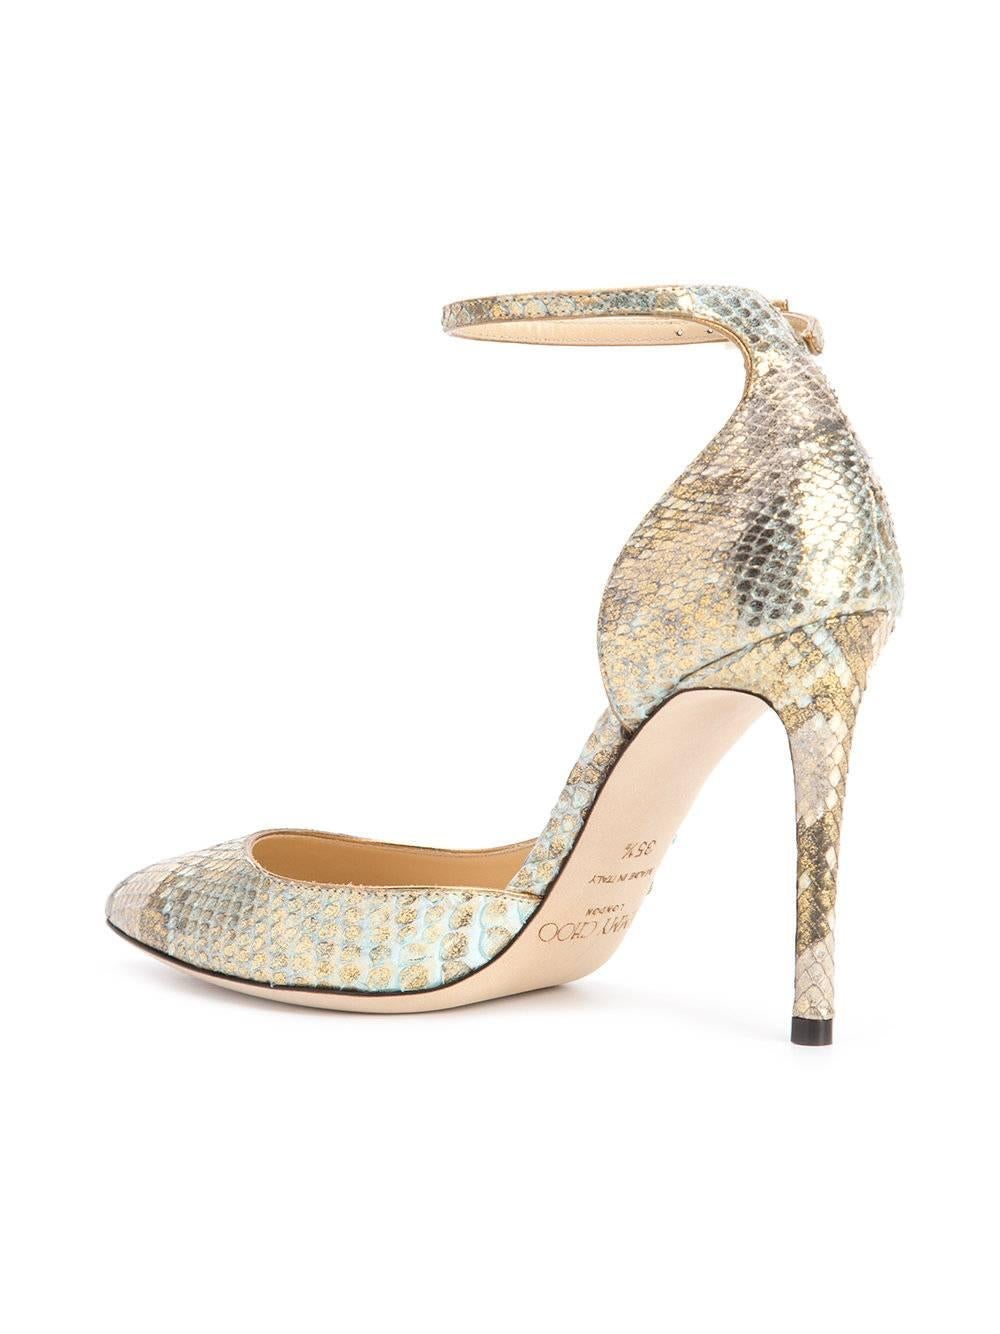 Jimmy Choo New Sold Out Metallic Python Evening High Heels Pumps in Box In New Condition In Chicago, IL